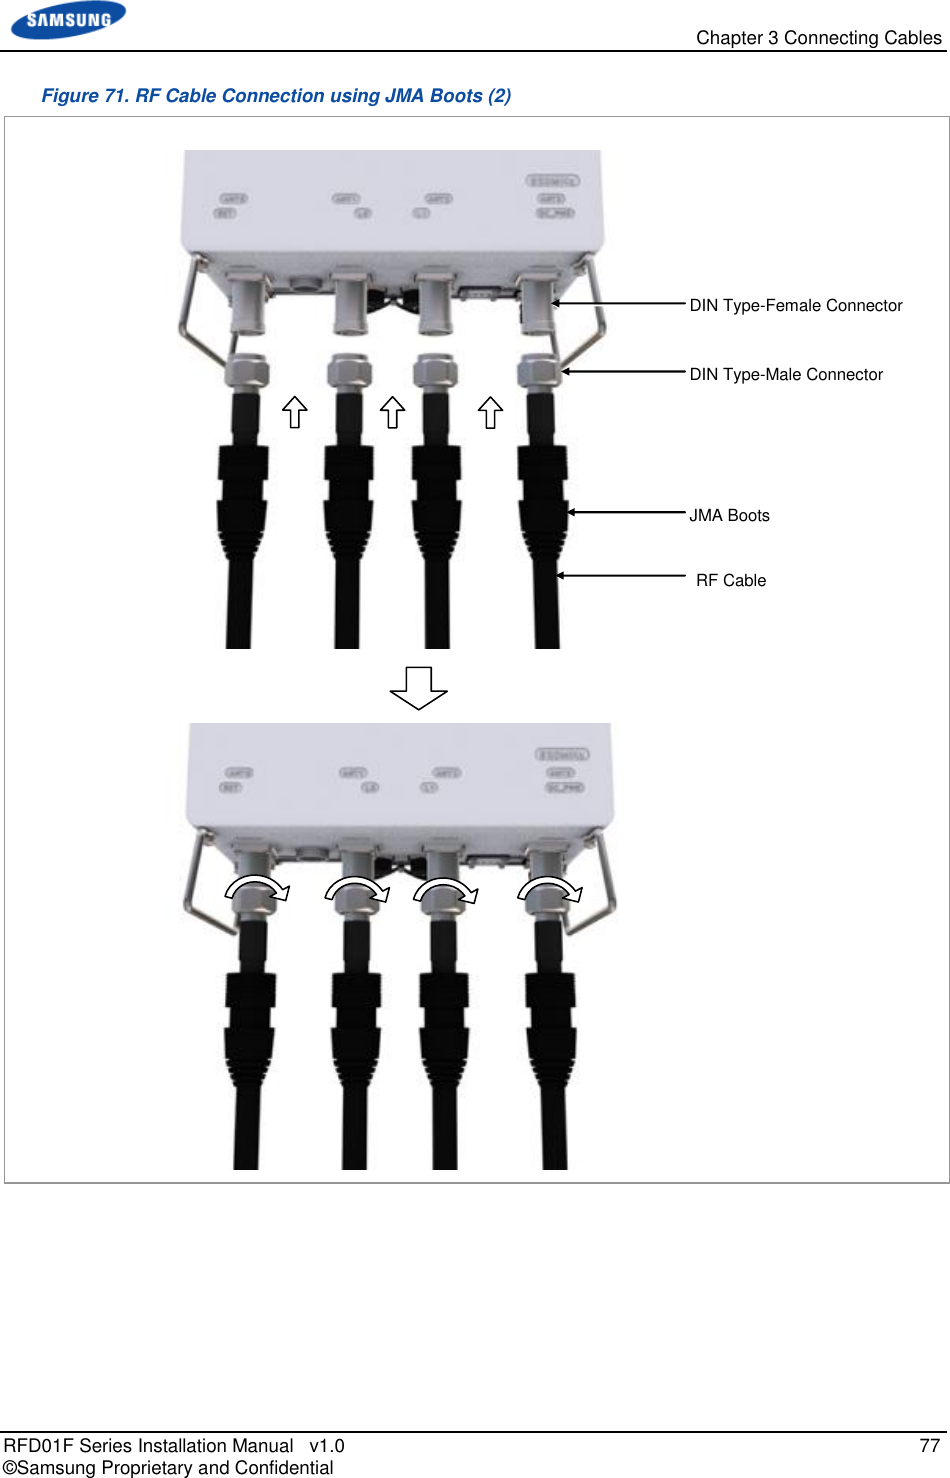   Chapter 3 Connecting Cables RFD01F Series Installation Manual   v1.0   77 © Samsung Proprietary and Confidential Figure 71. RF Cable Connection using JMA Boots (2)      RF Cable  DIN Type-Female Connector DIN Type-Male Connector  JMA Boots 